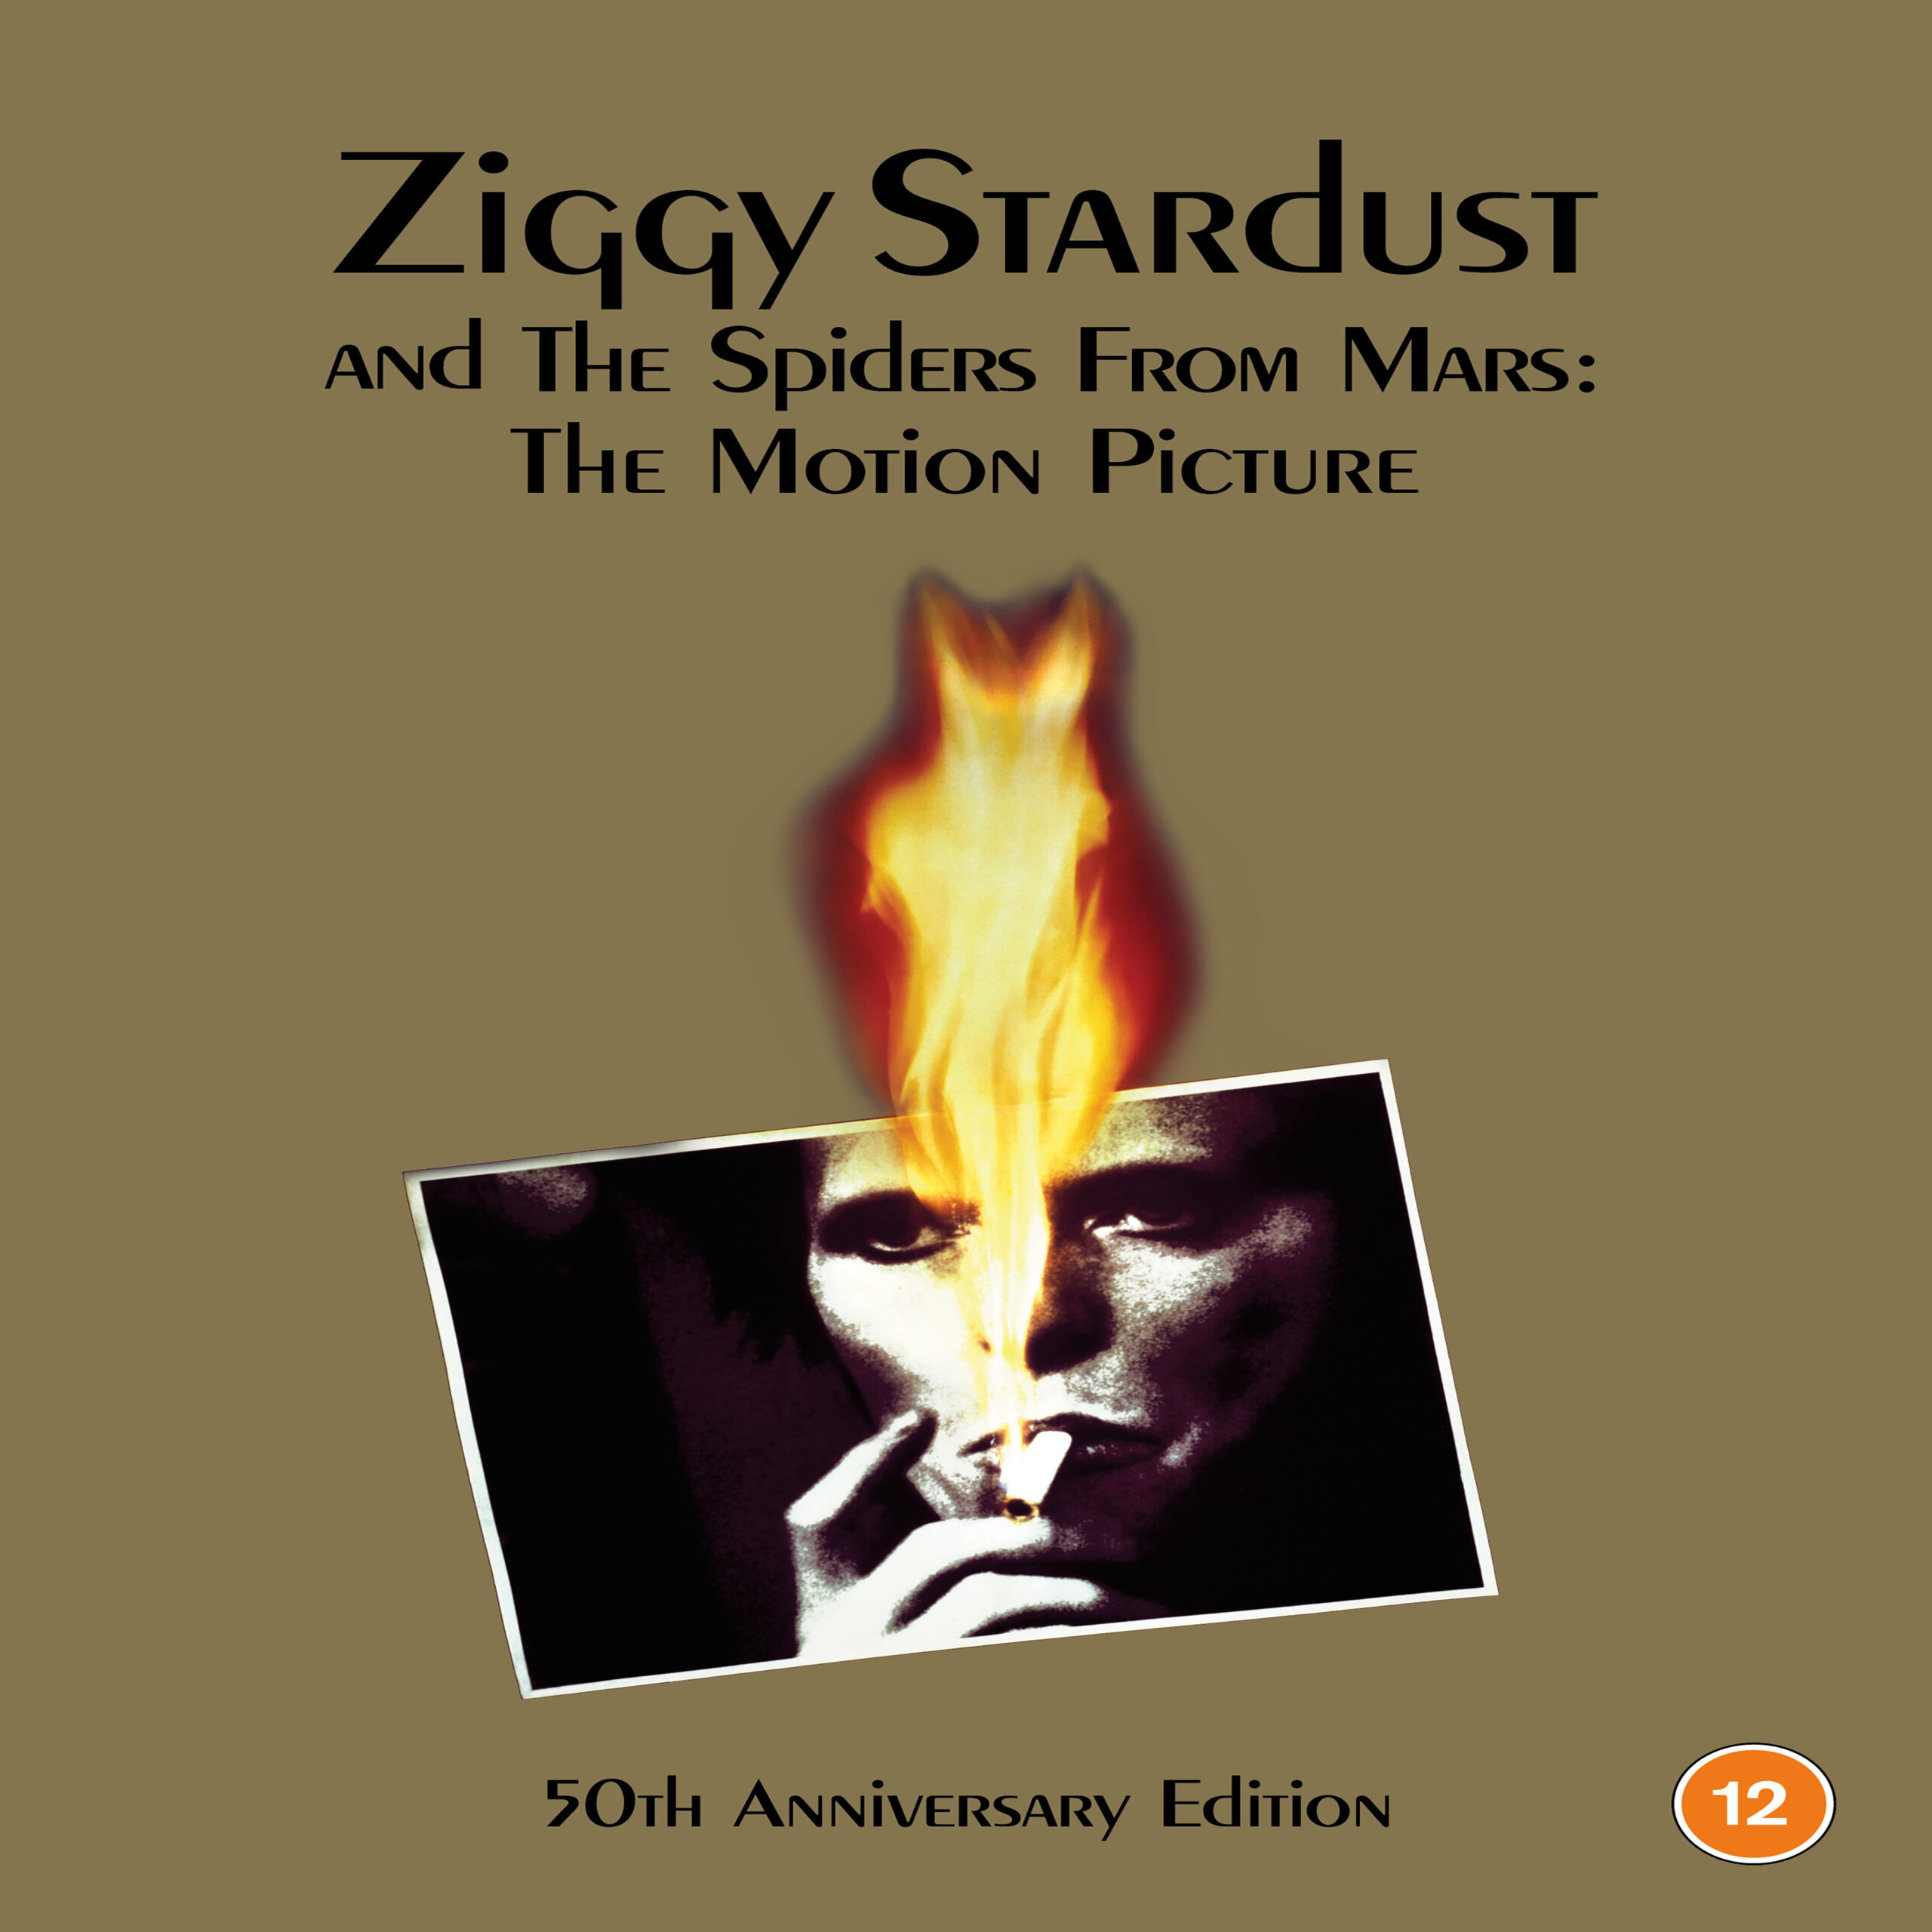 50th Anniversary For Ziggy Stardust: The Motion Picture